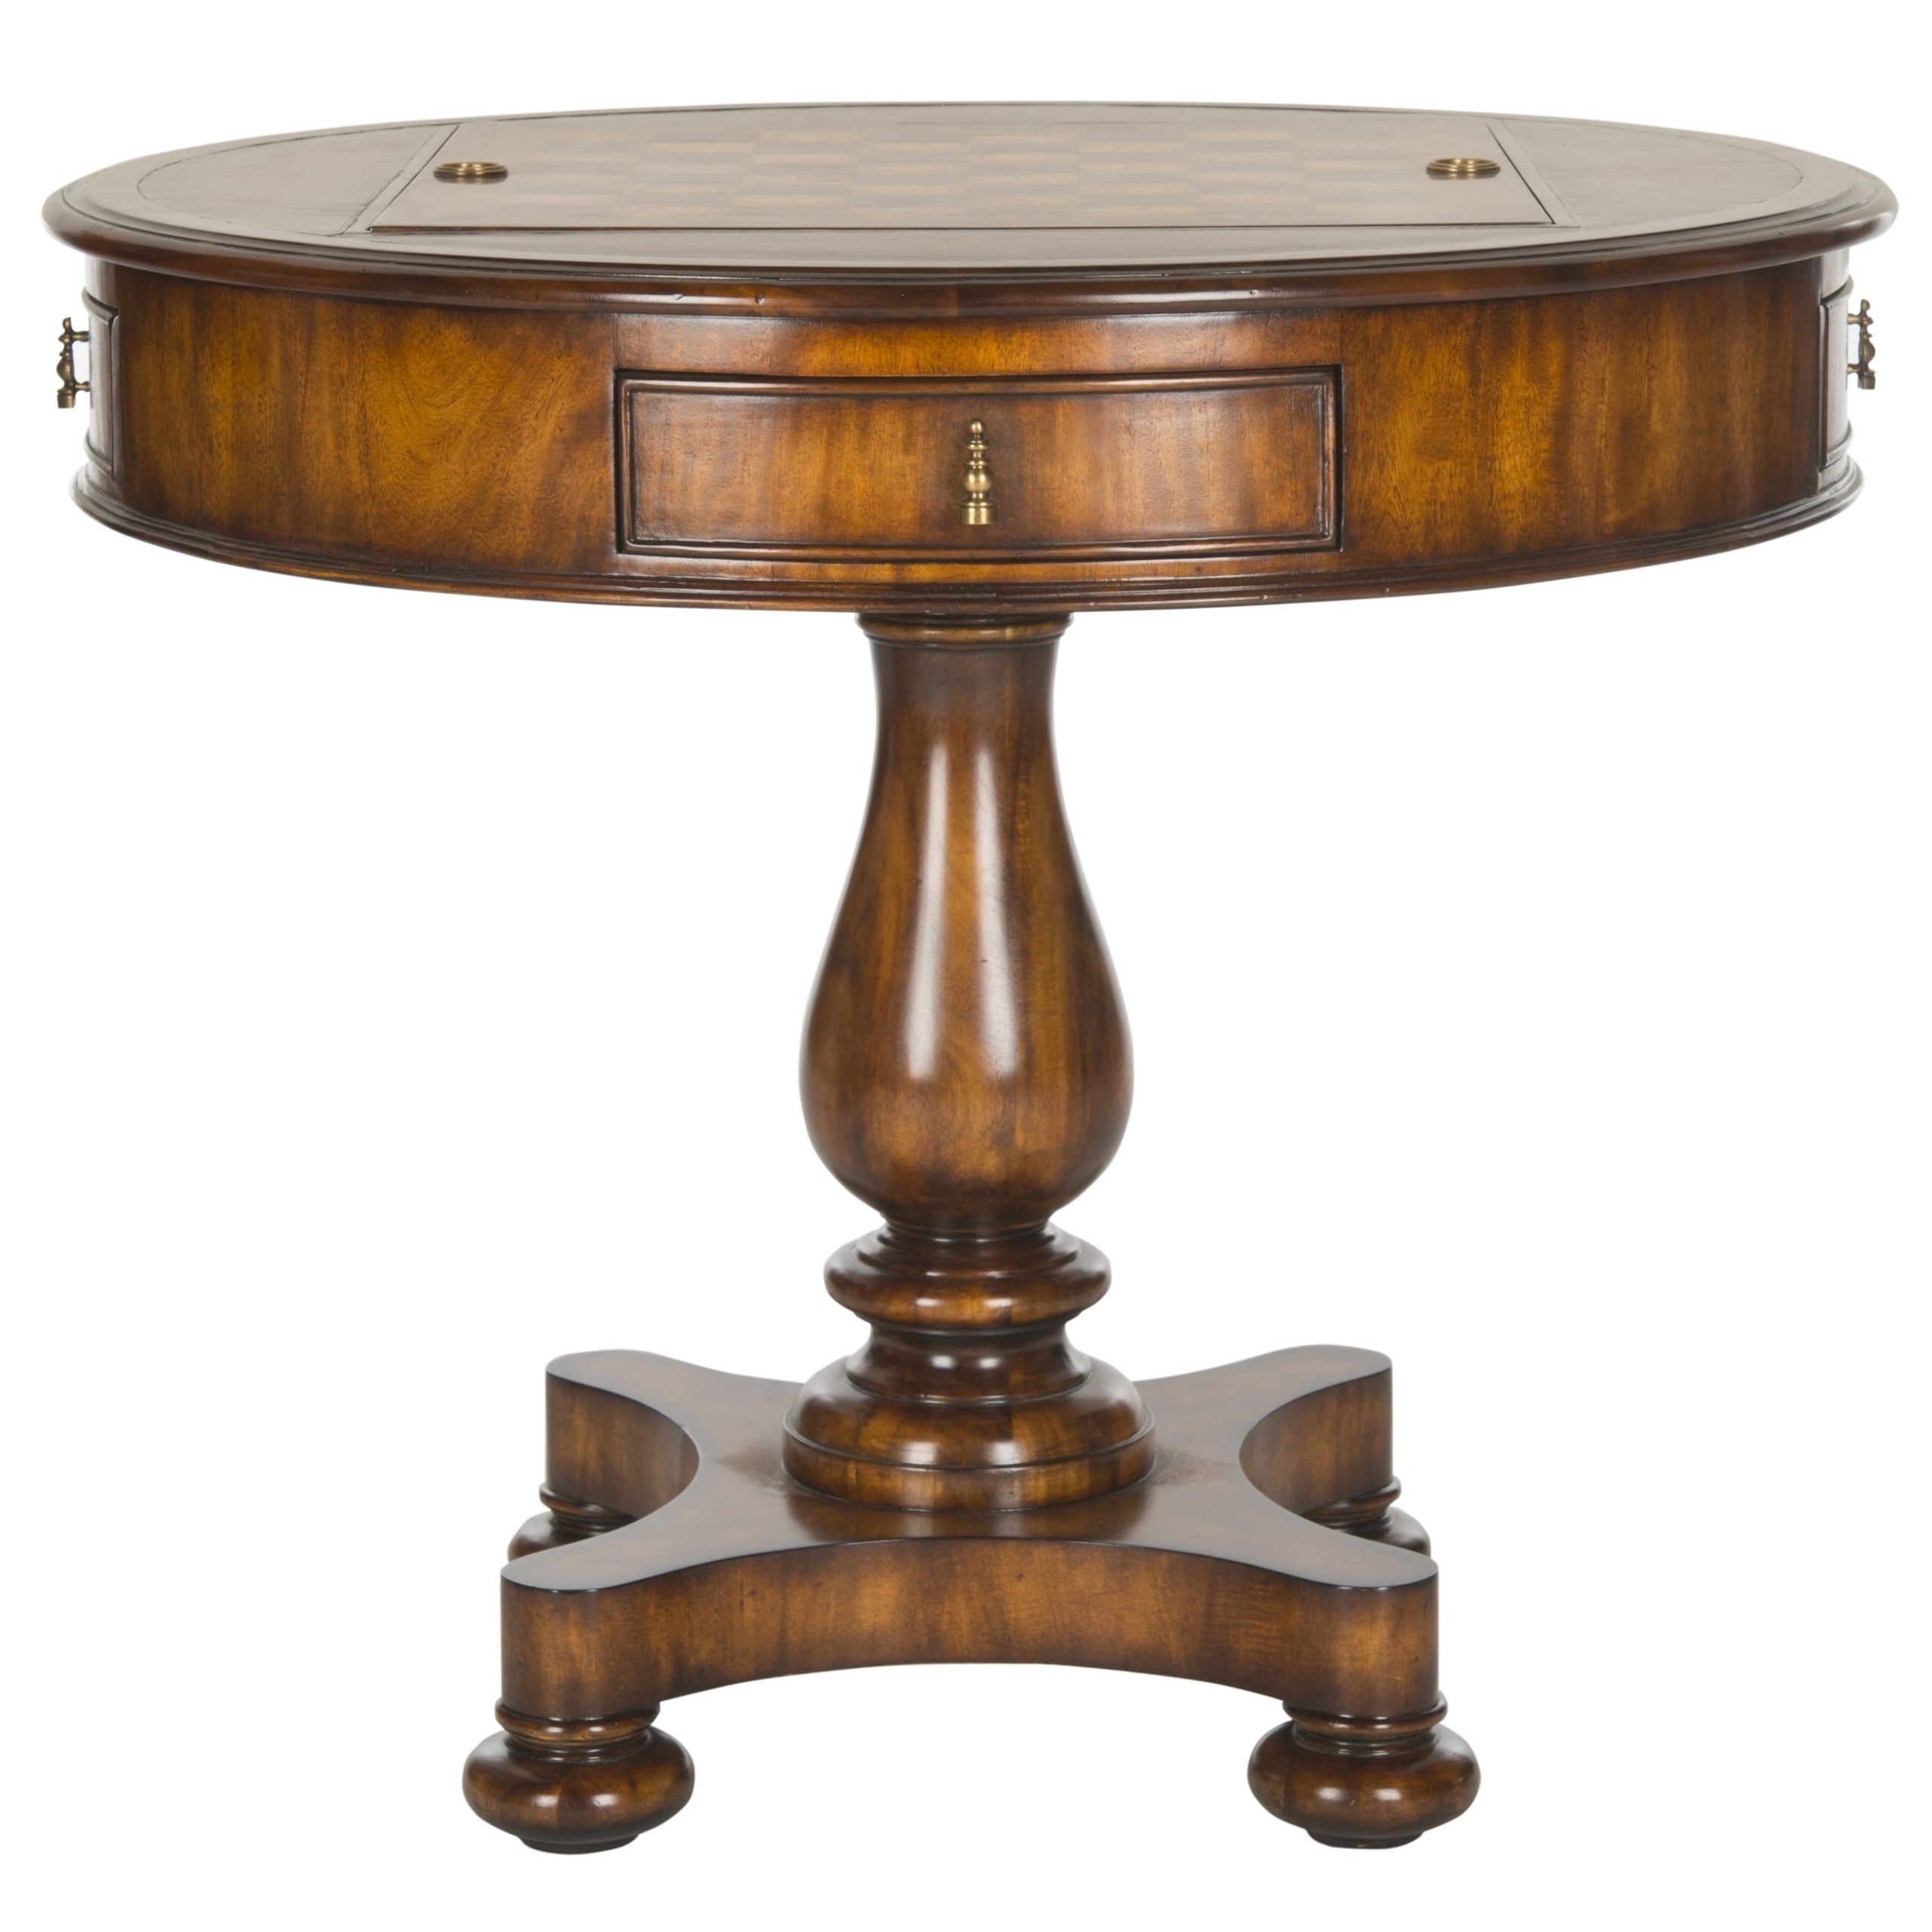 34" Wingfield Multi Game Table